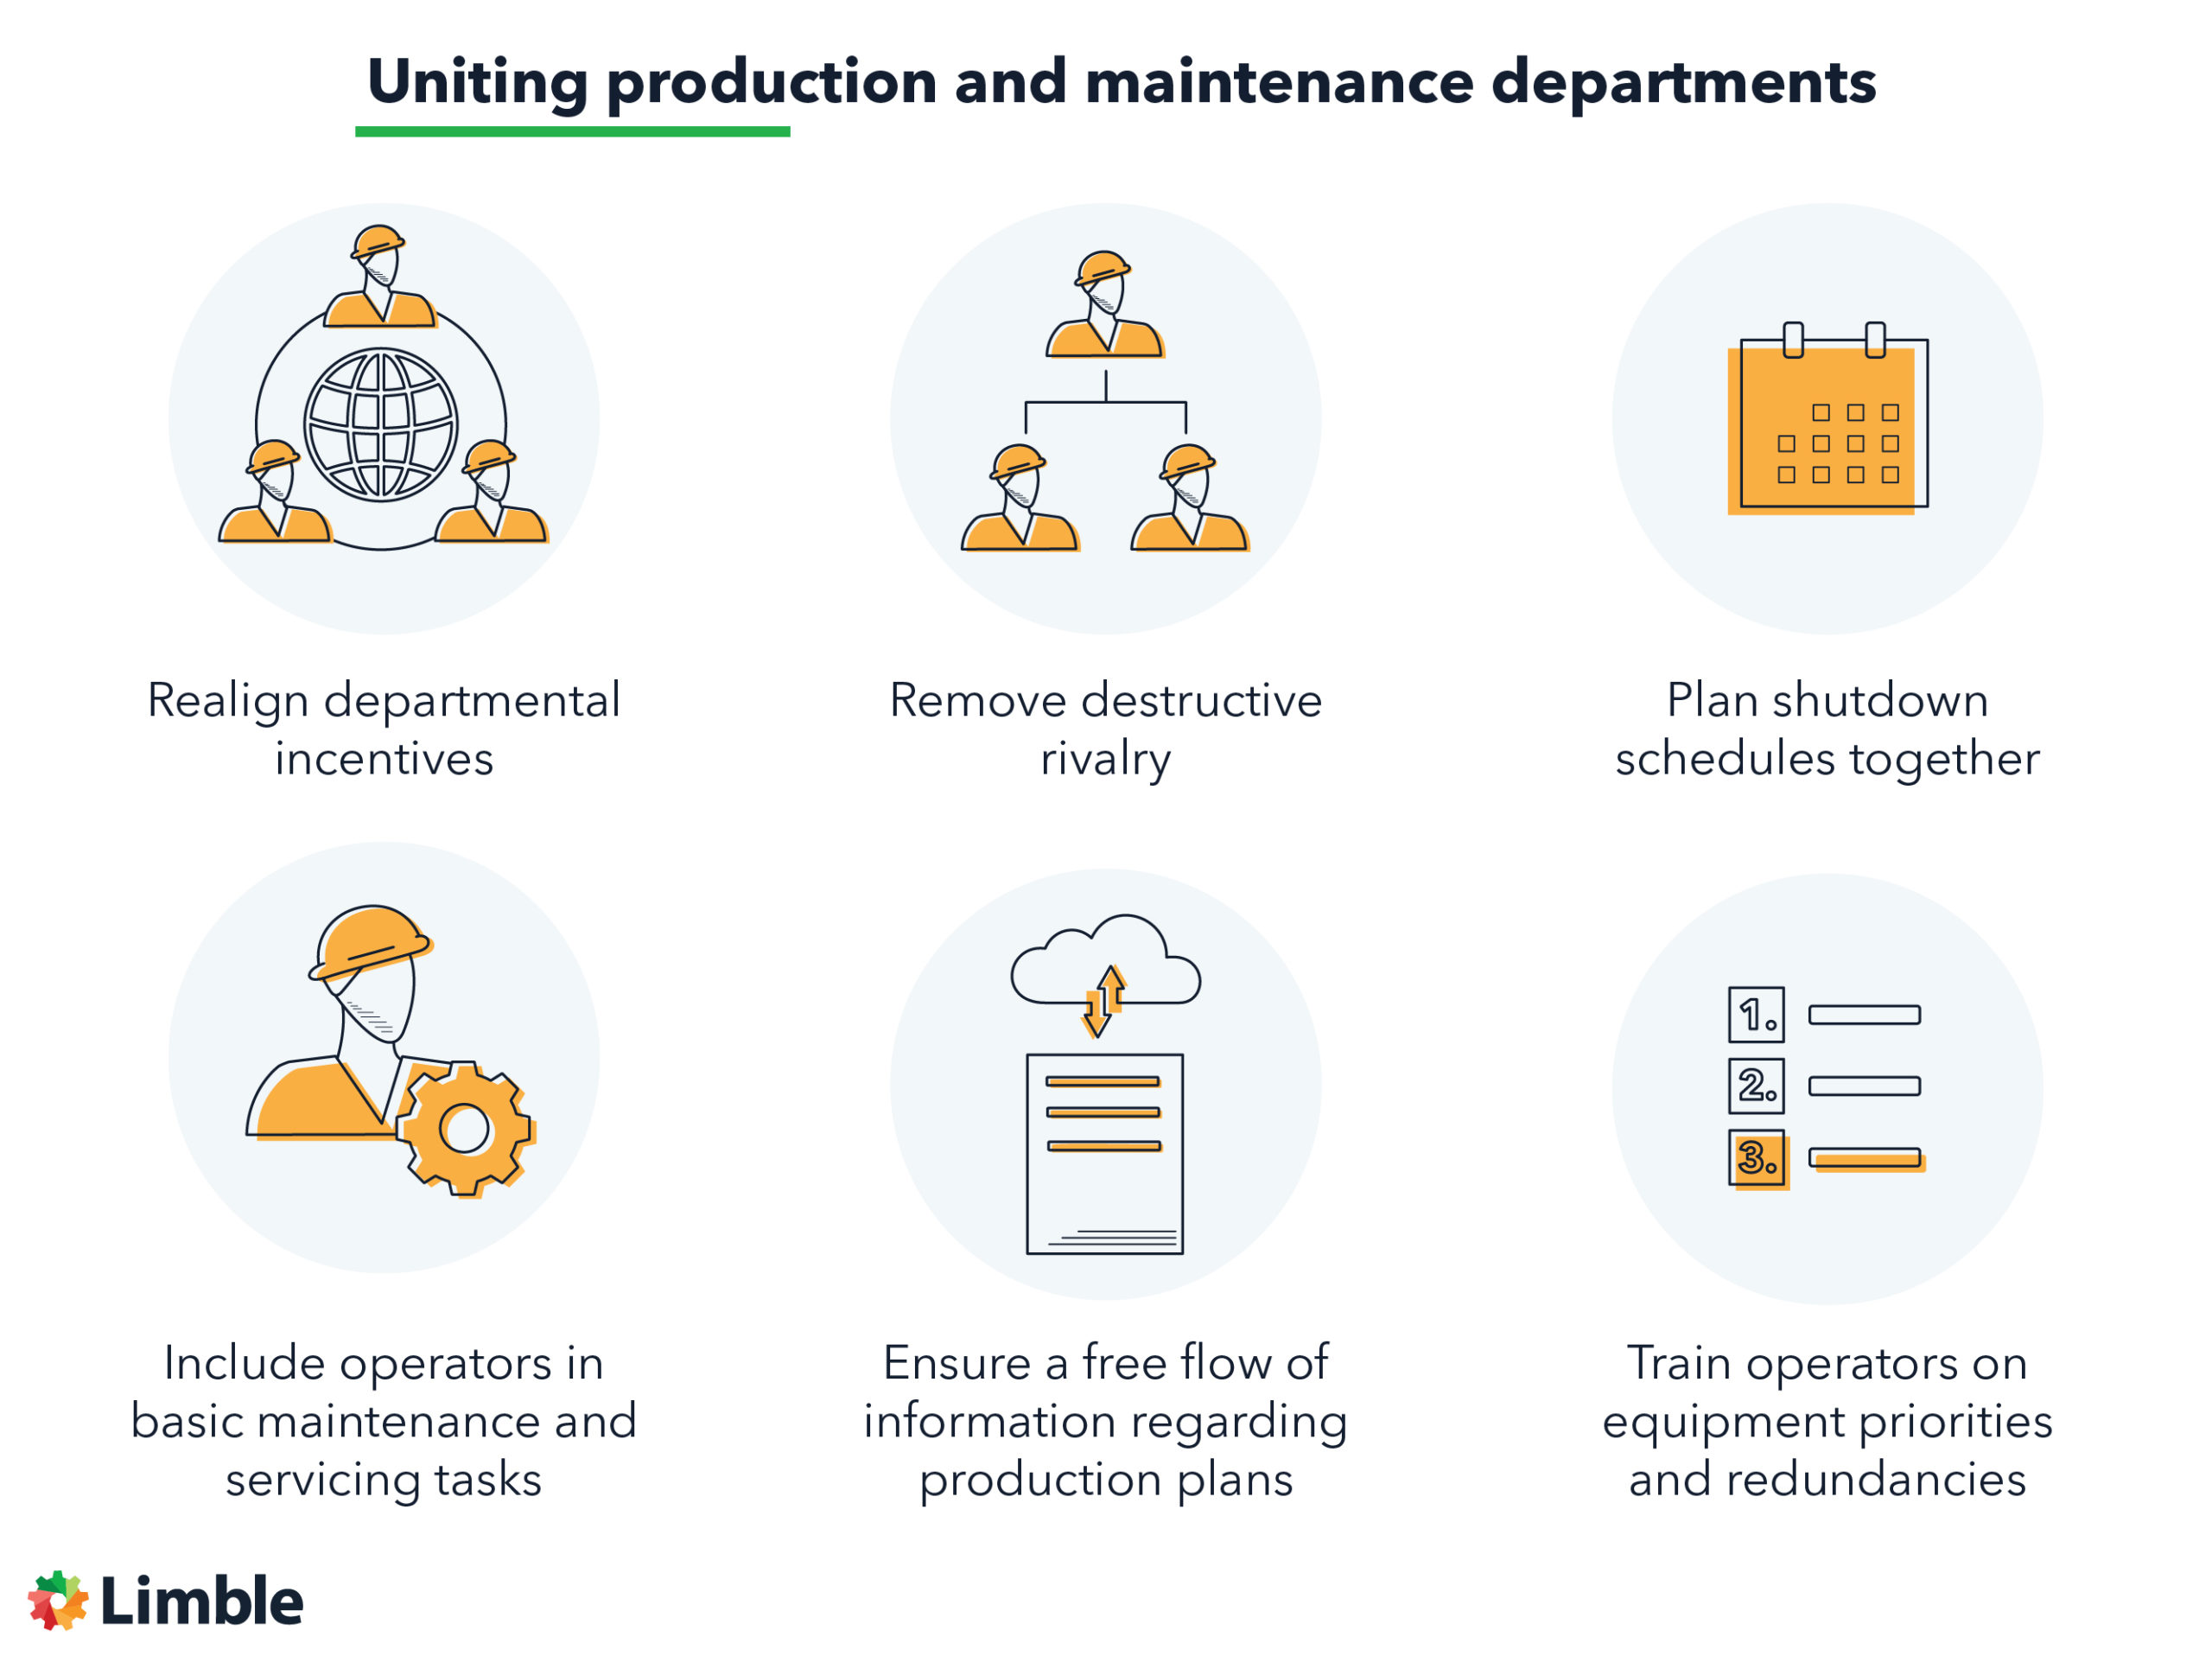 Six tips for uniting your production and maintenance departments